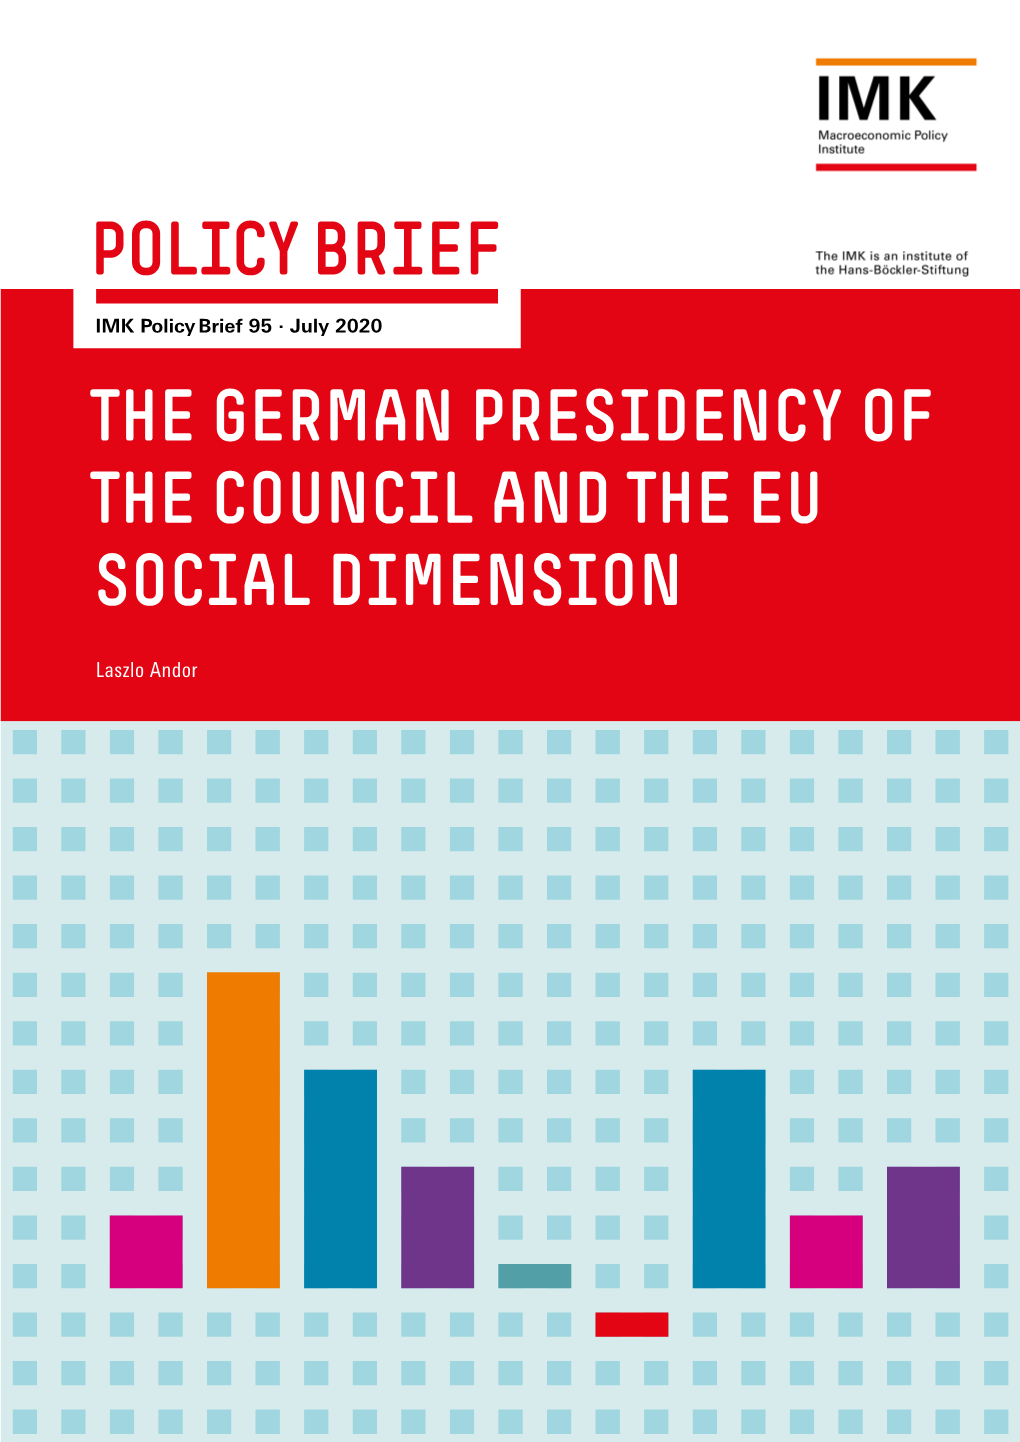 The German Presidency of the Council and the Eu Social Dimension